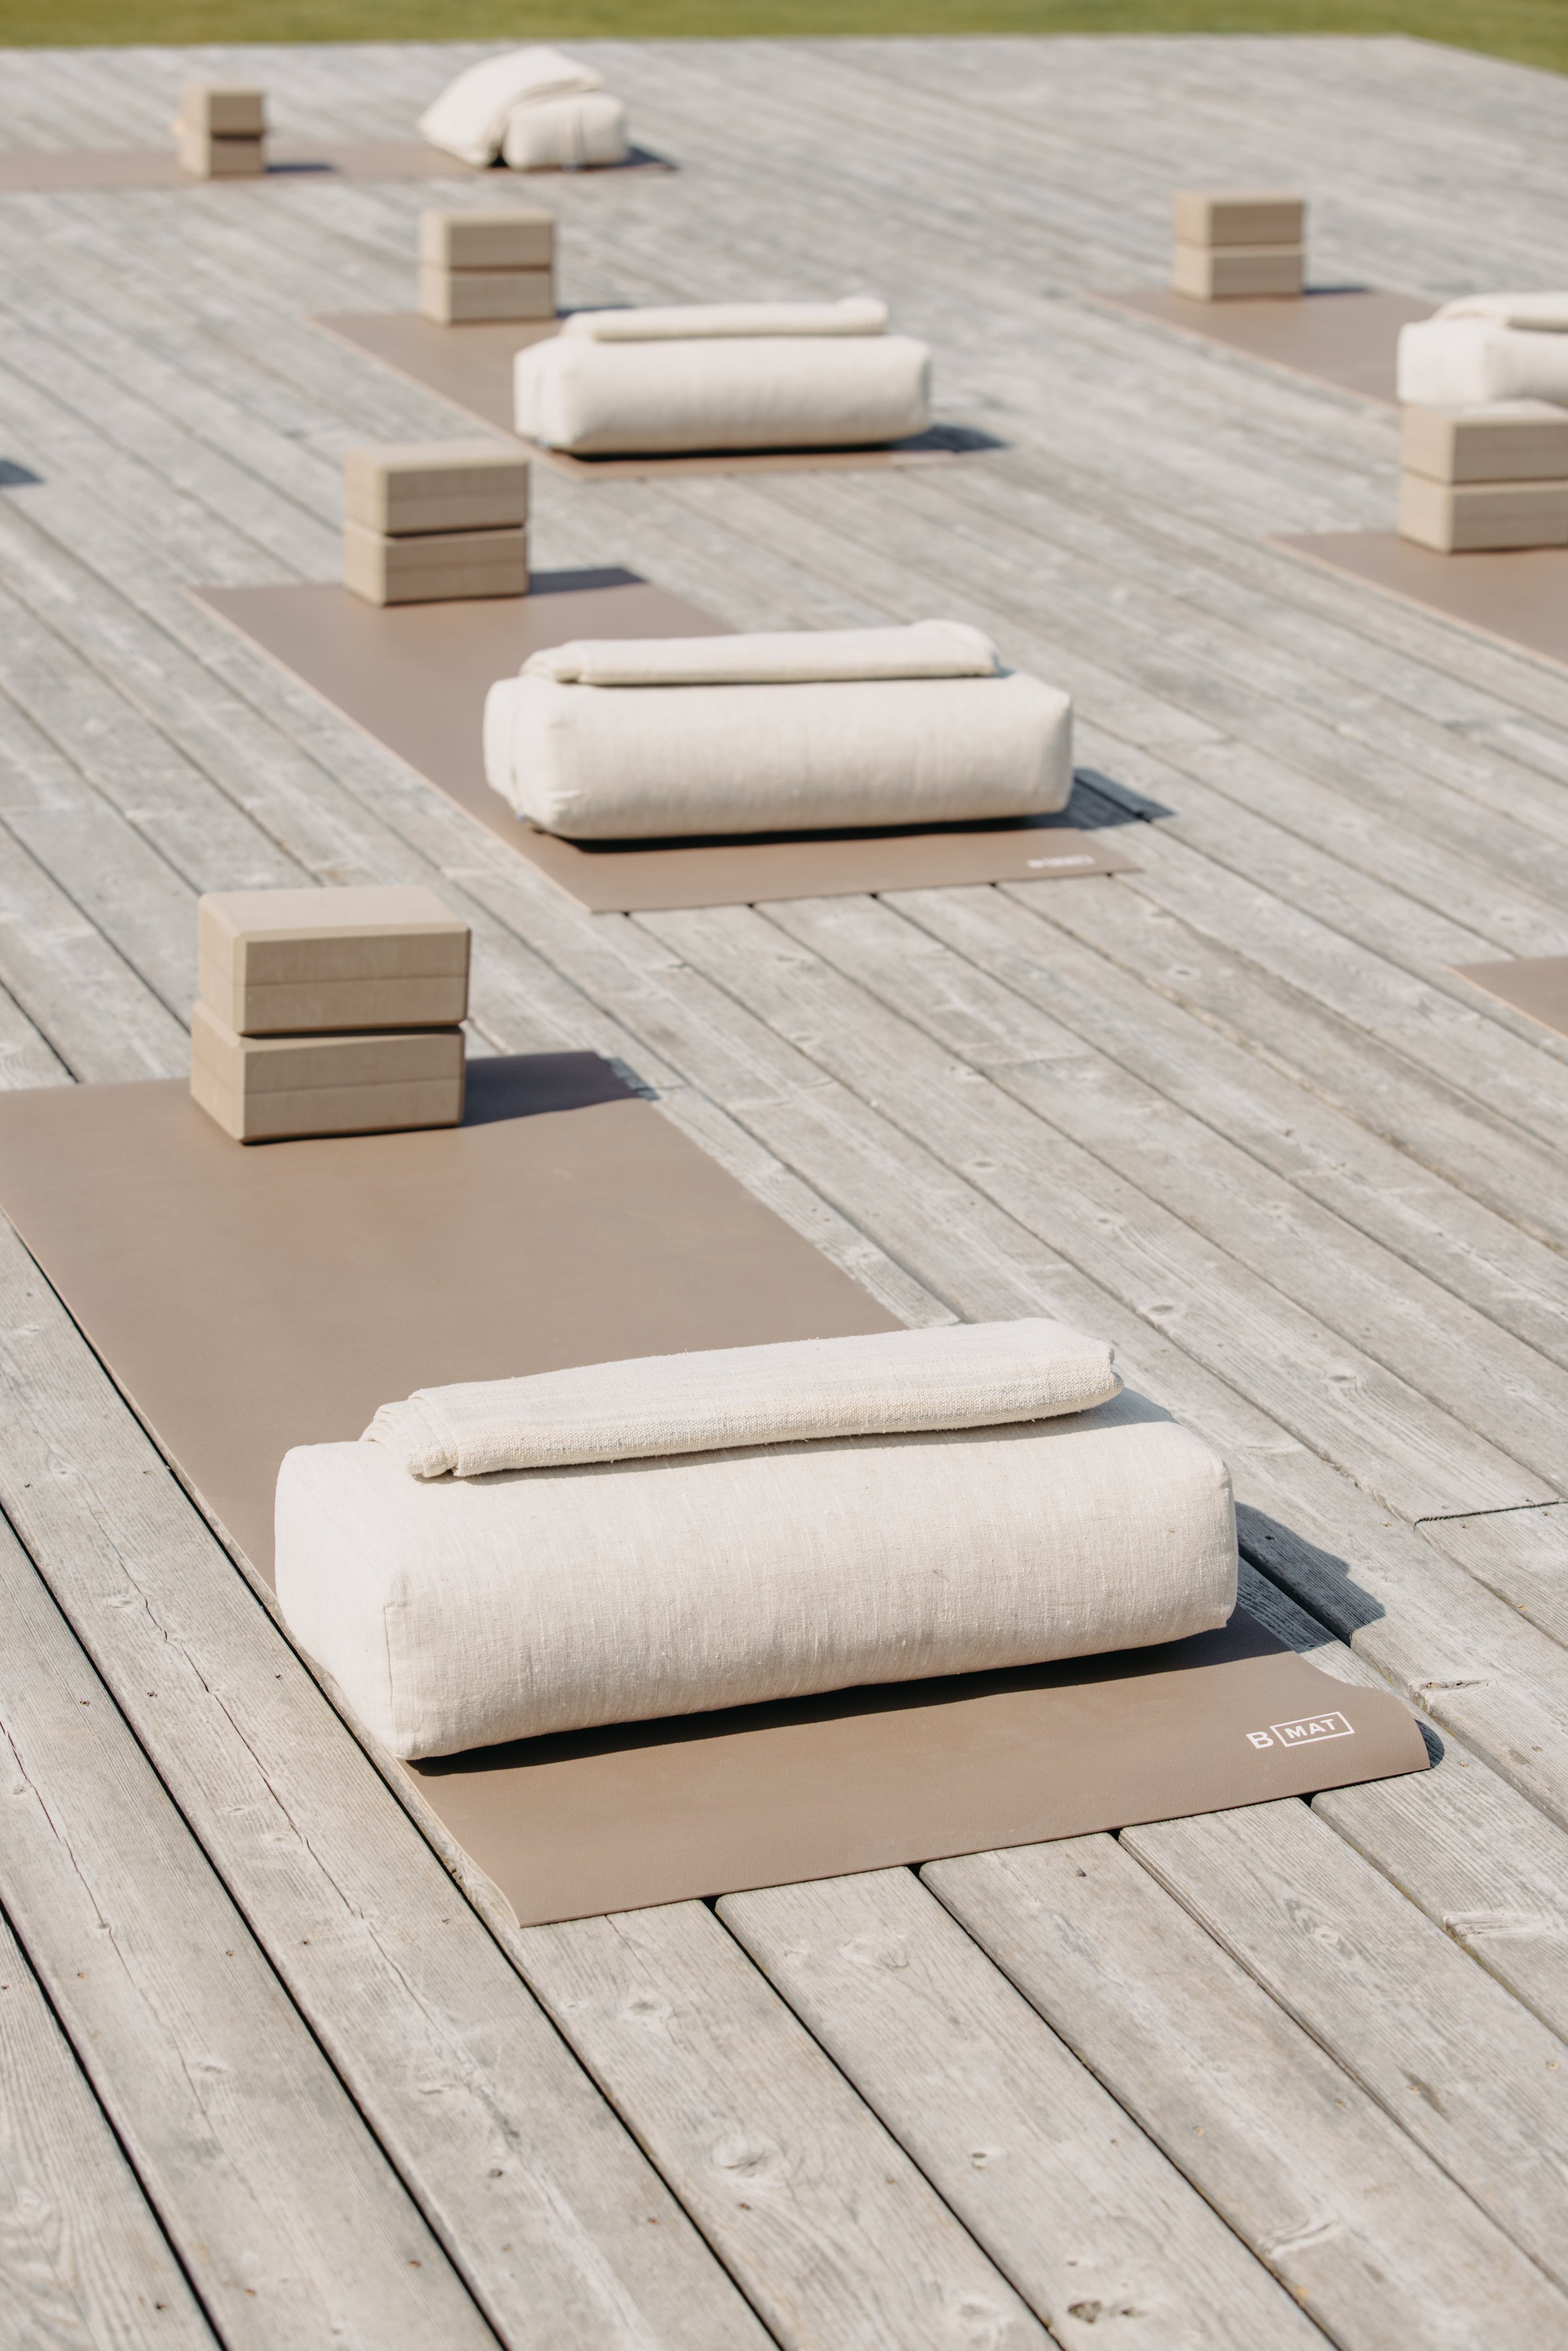 Yoga mats with towels set up outside